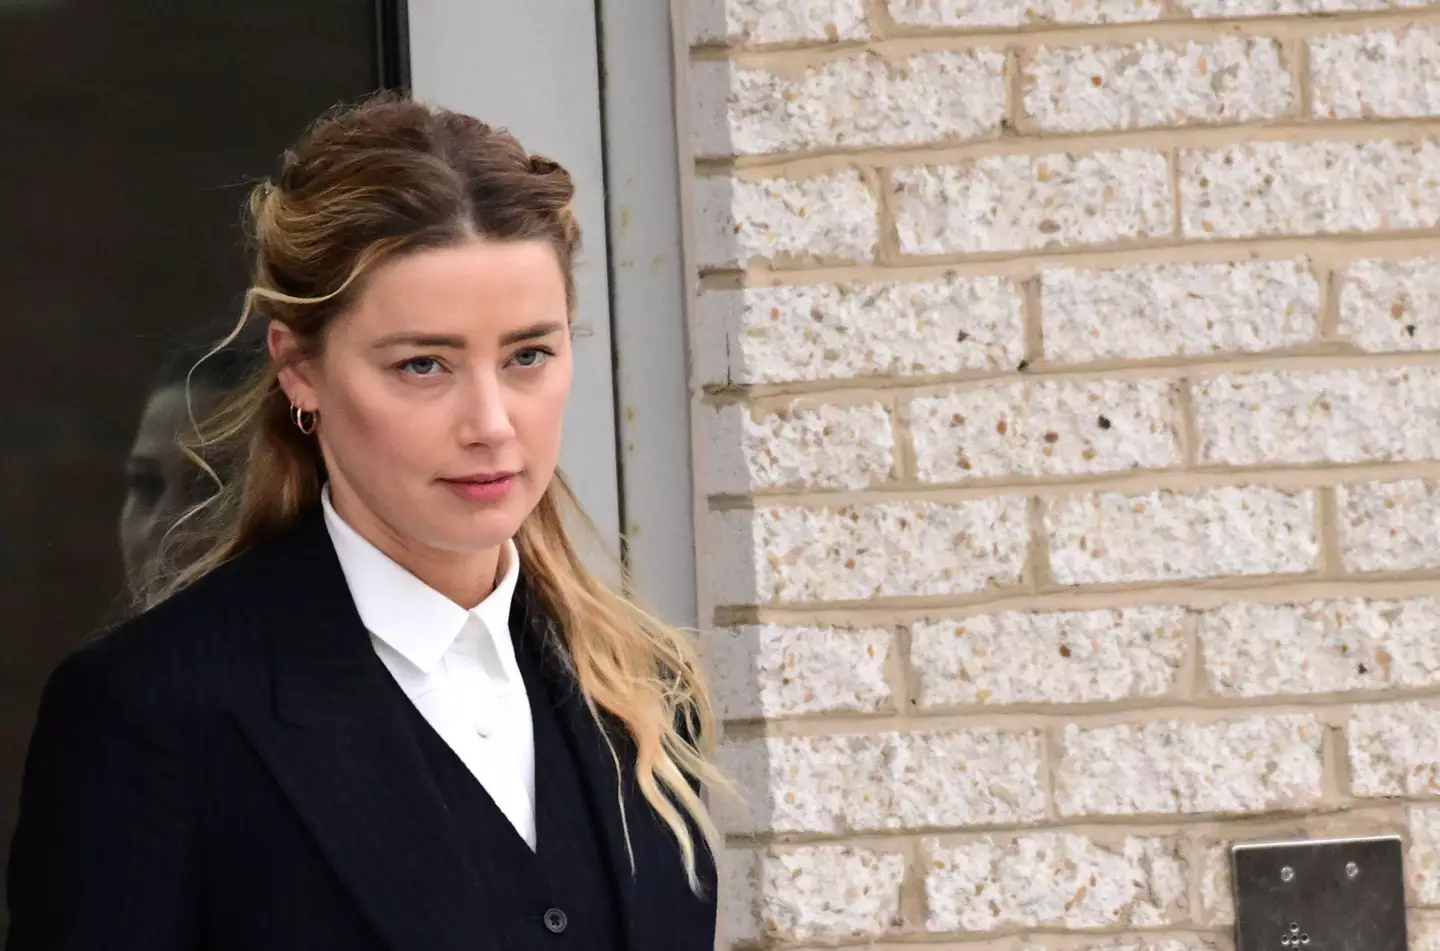 A doctor diagnosed Amber Heard with two personality disorders.